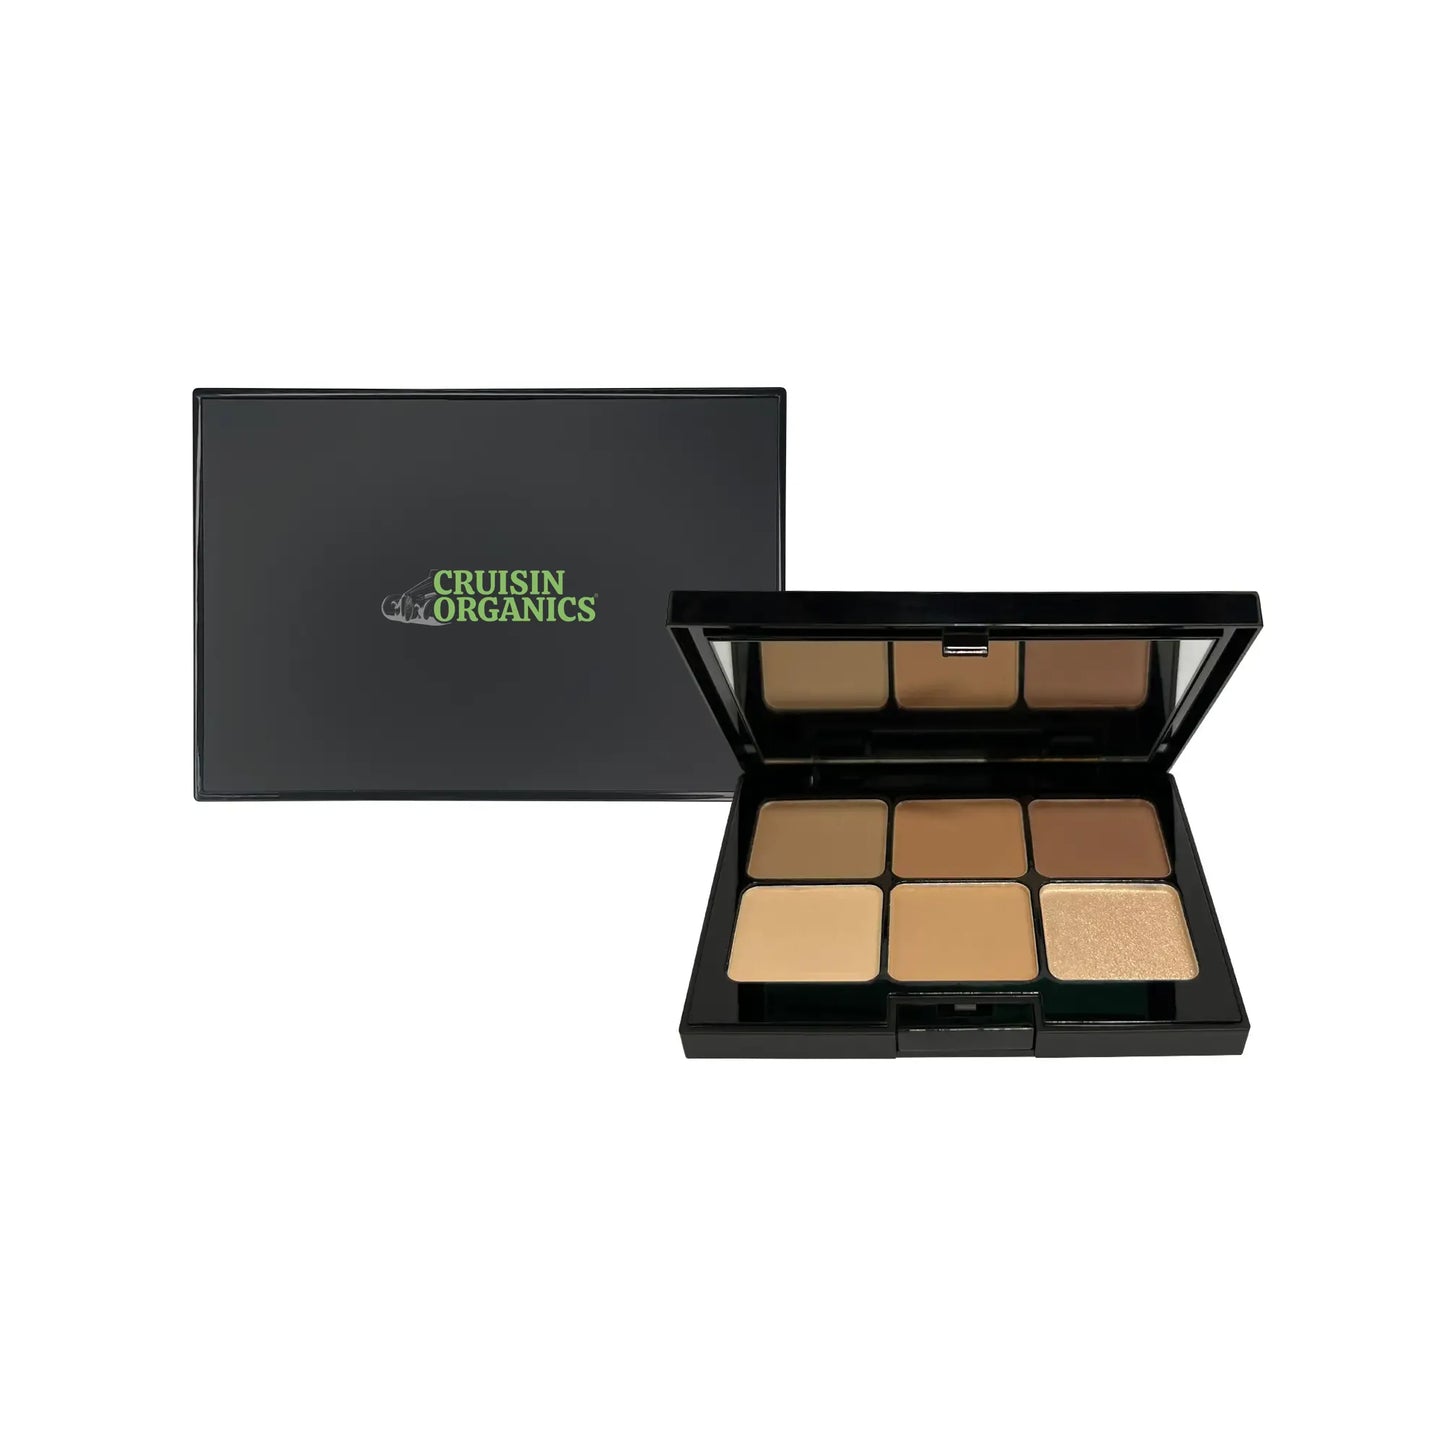 Unleash your inner beauty explorer with the Cruisin Organics La Creme Eye Shadow Palette! This travel companion for beauty lovers features 6 rich and shimmering shades to create endless looks. Perfect for on-the-go touch-ups, this mini palette from Cruisin Organics will take your makeup game to the next level!